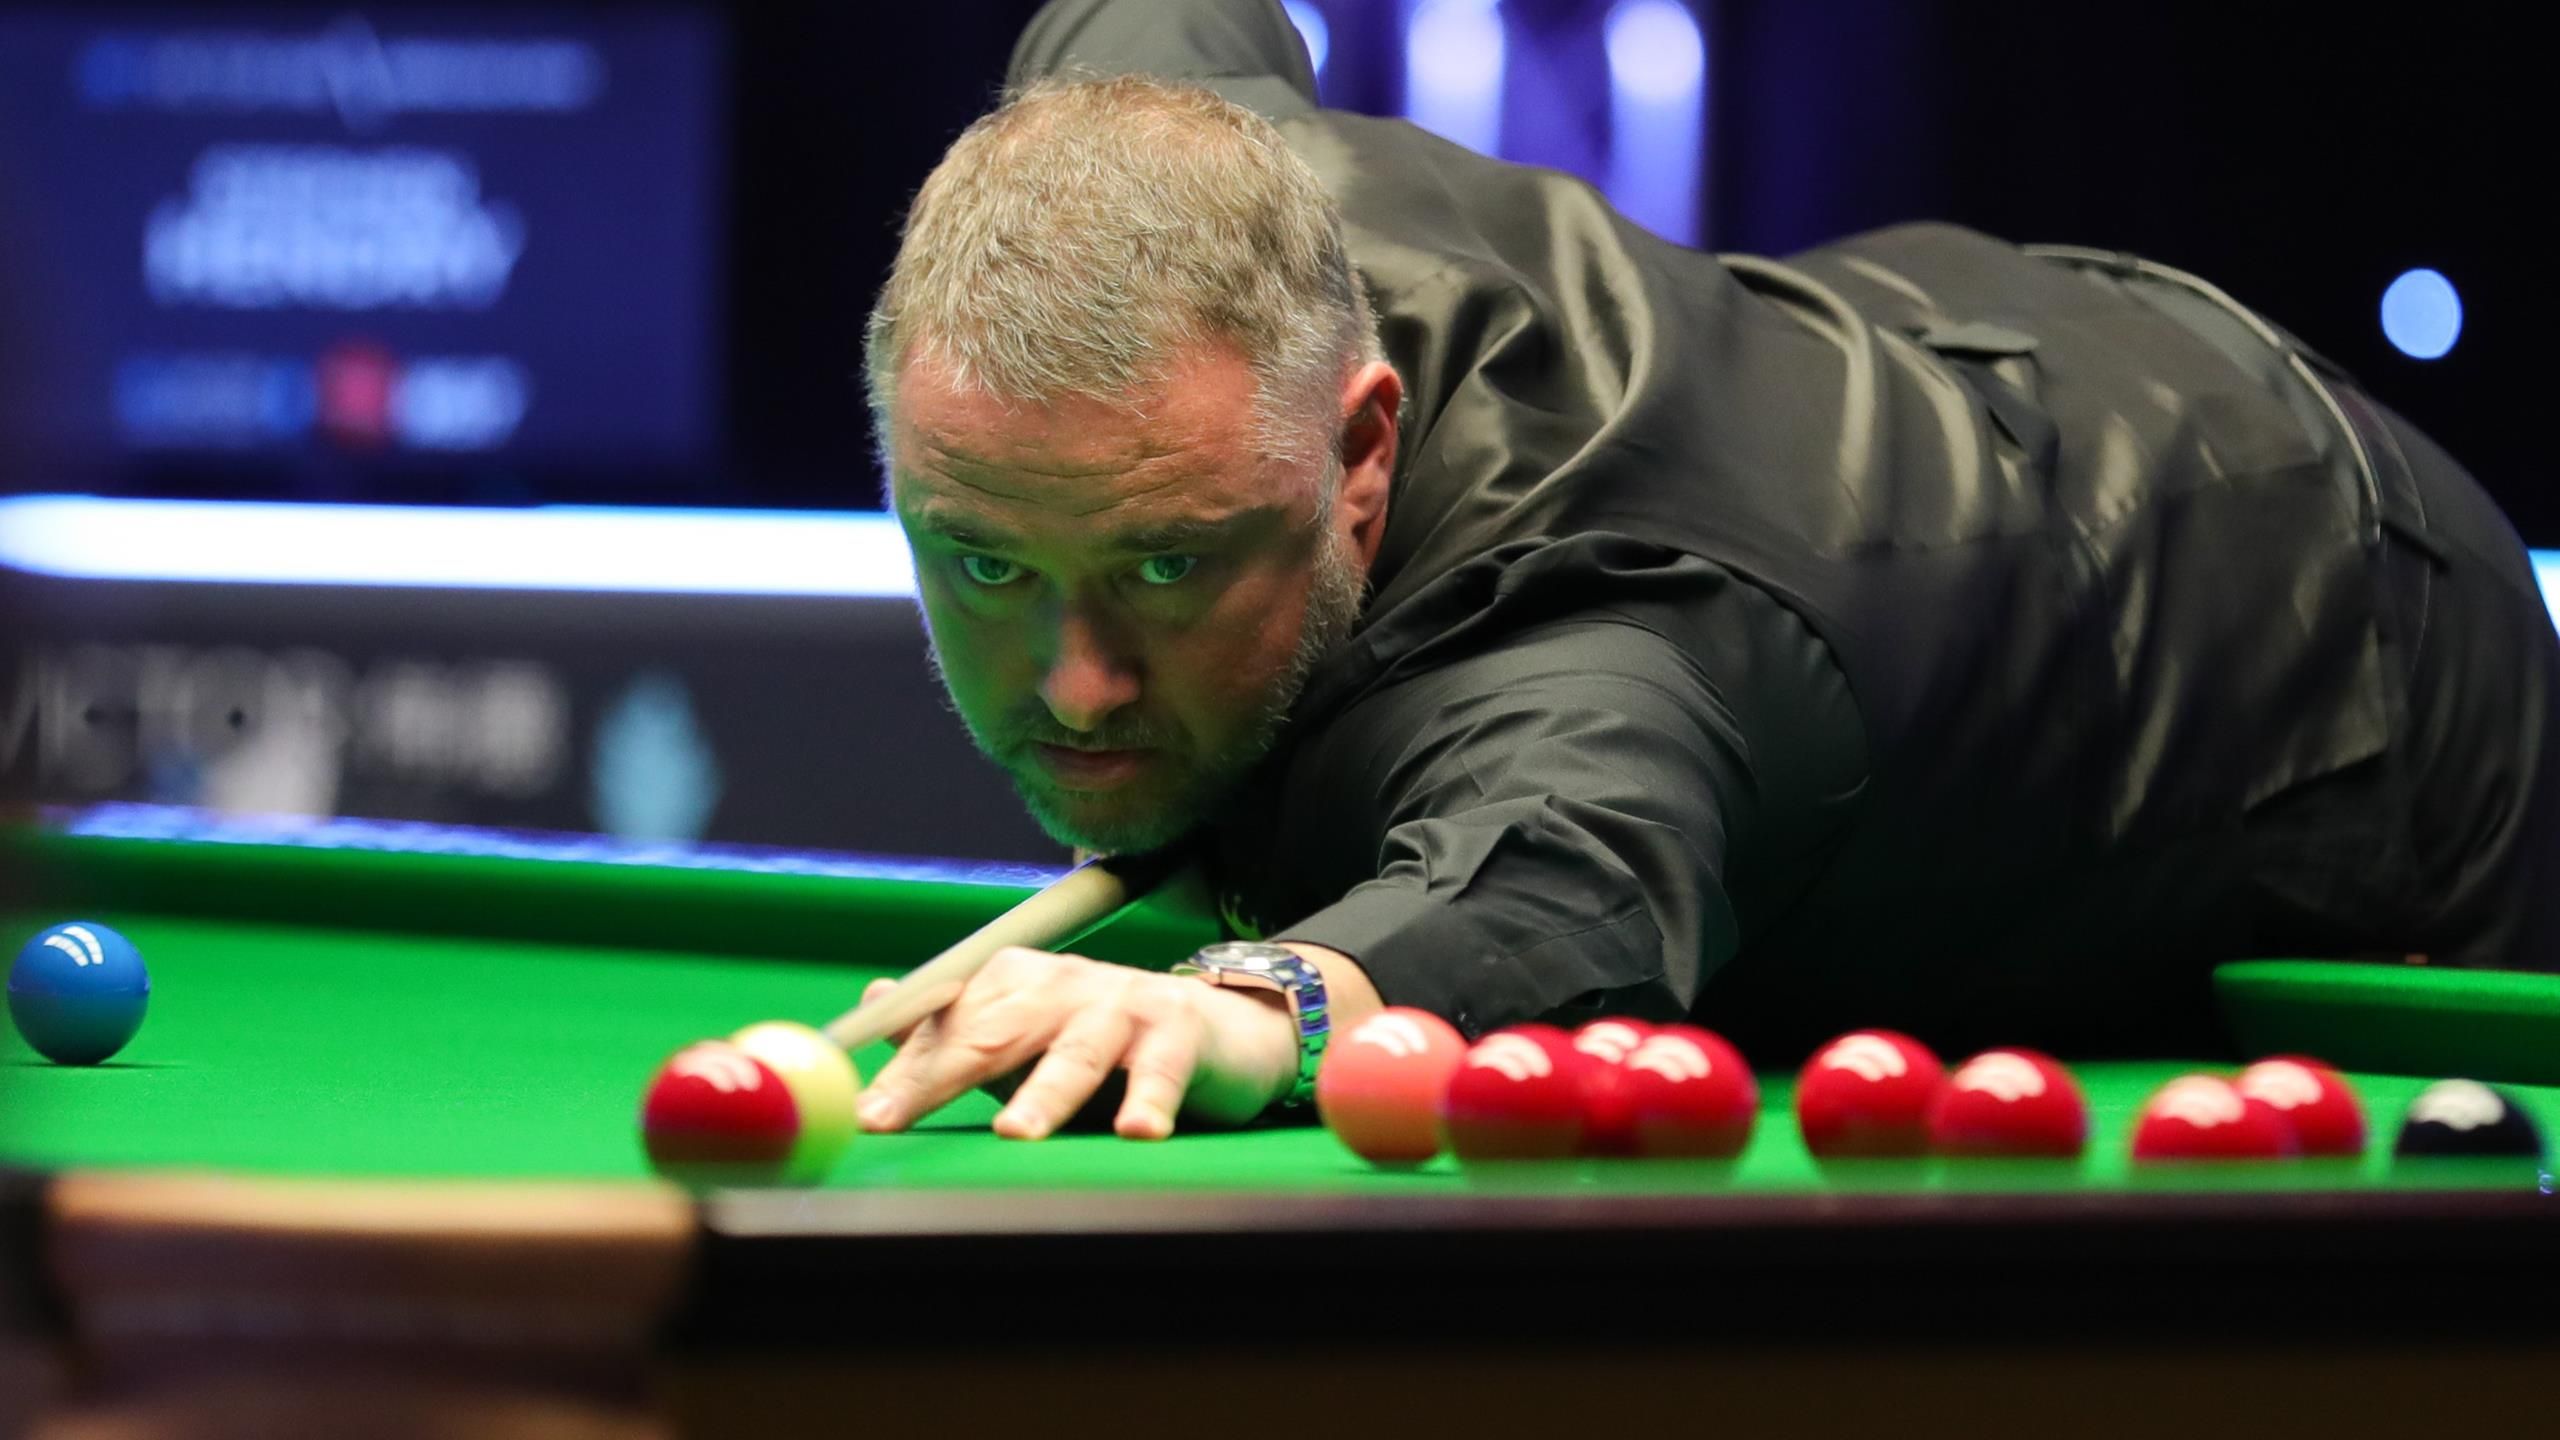 Gibraltar Open snooker LIVE - Stephen Hendry makes his comeback nine years after retirement